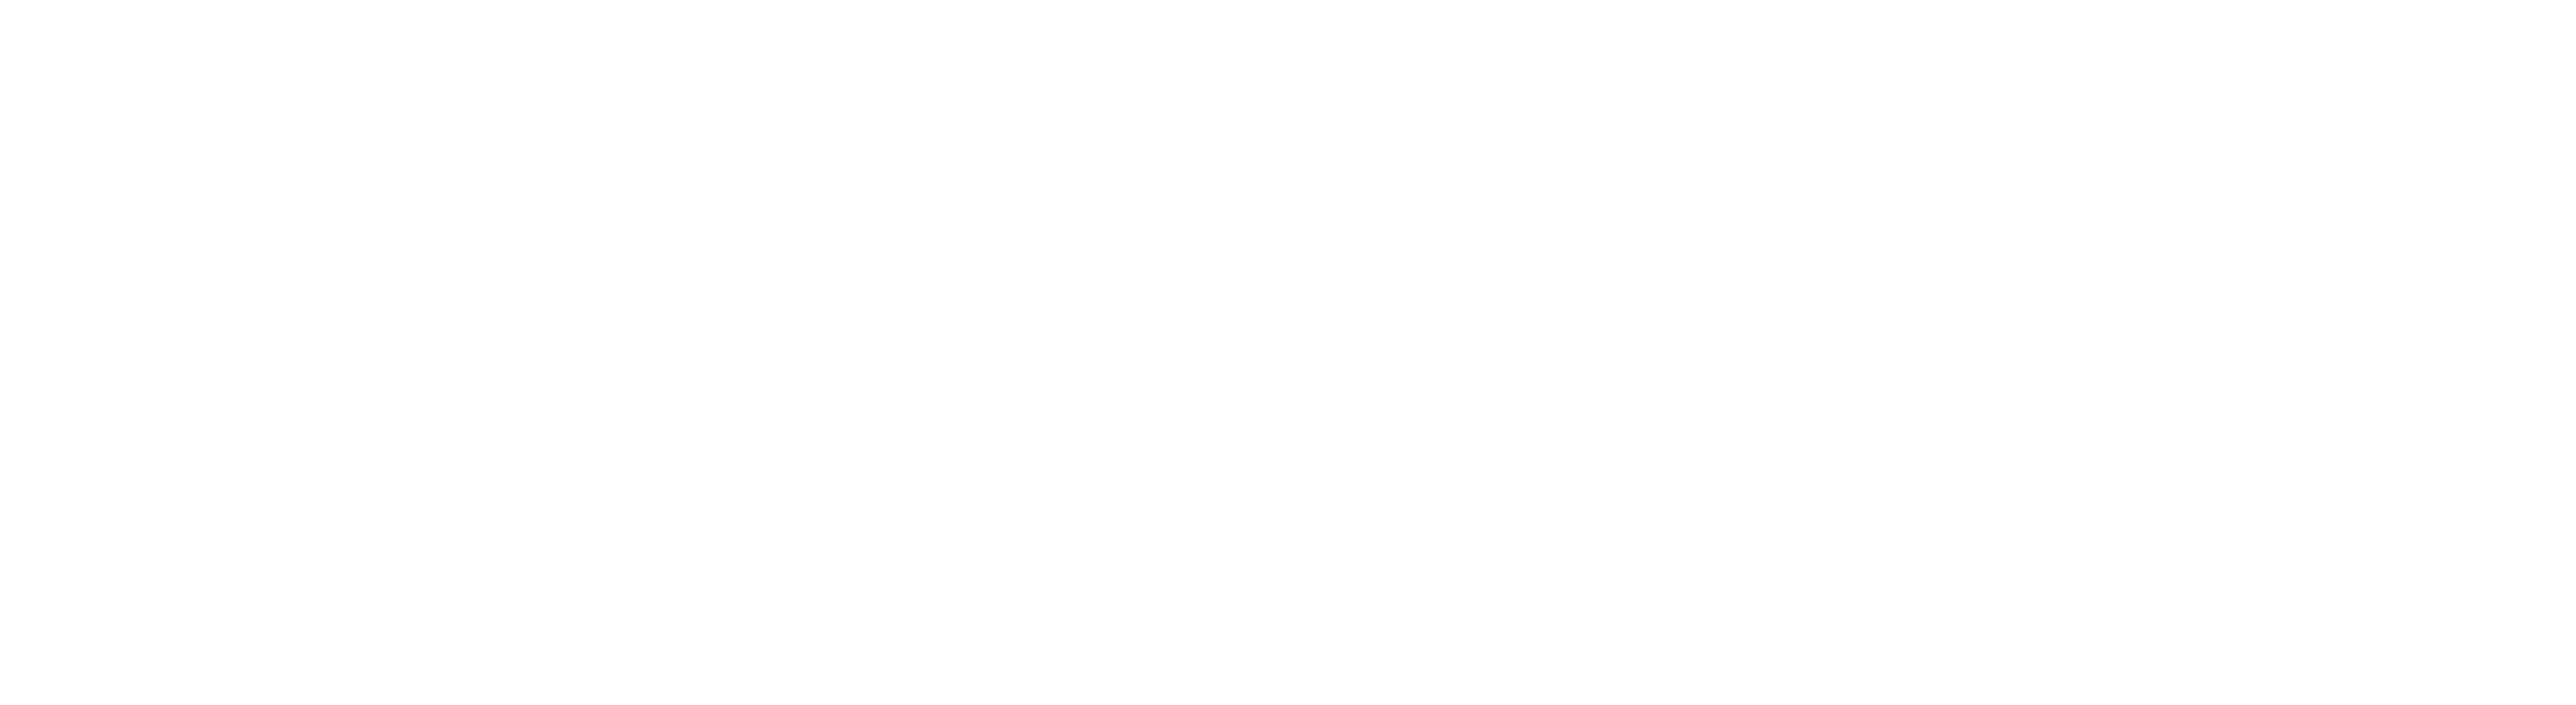 The Parkwest Apartments